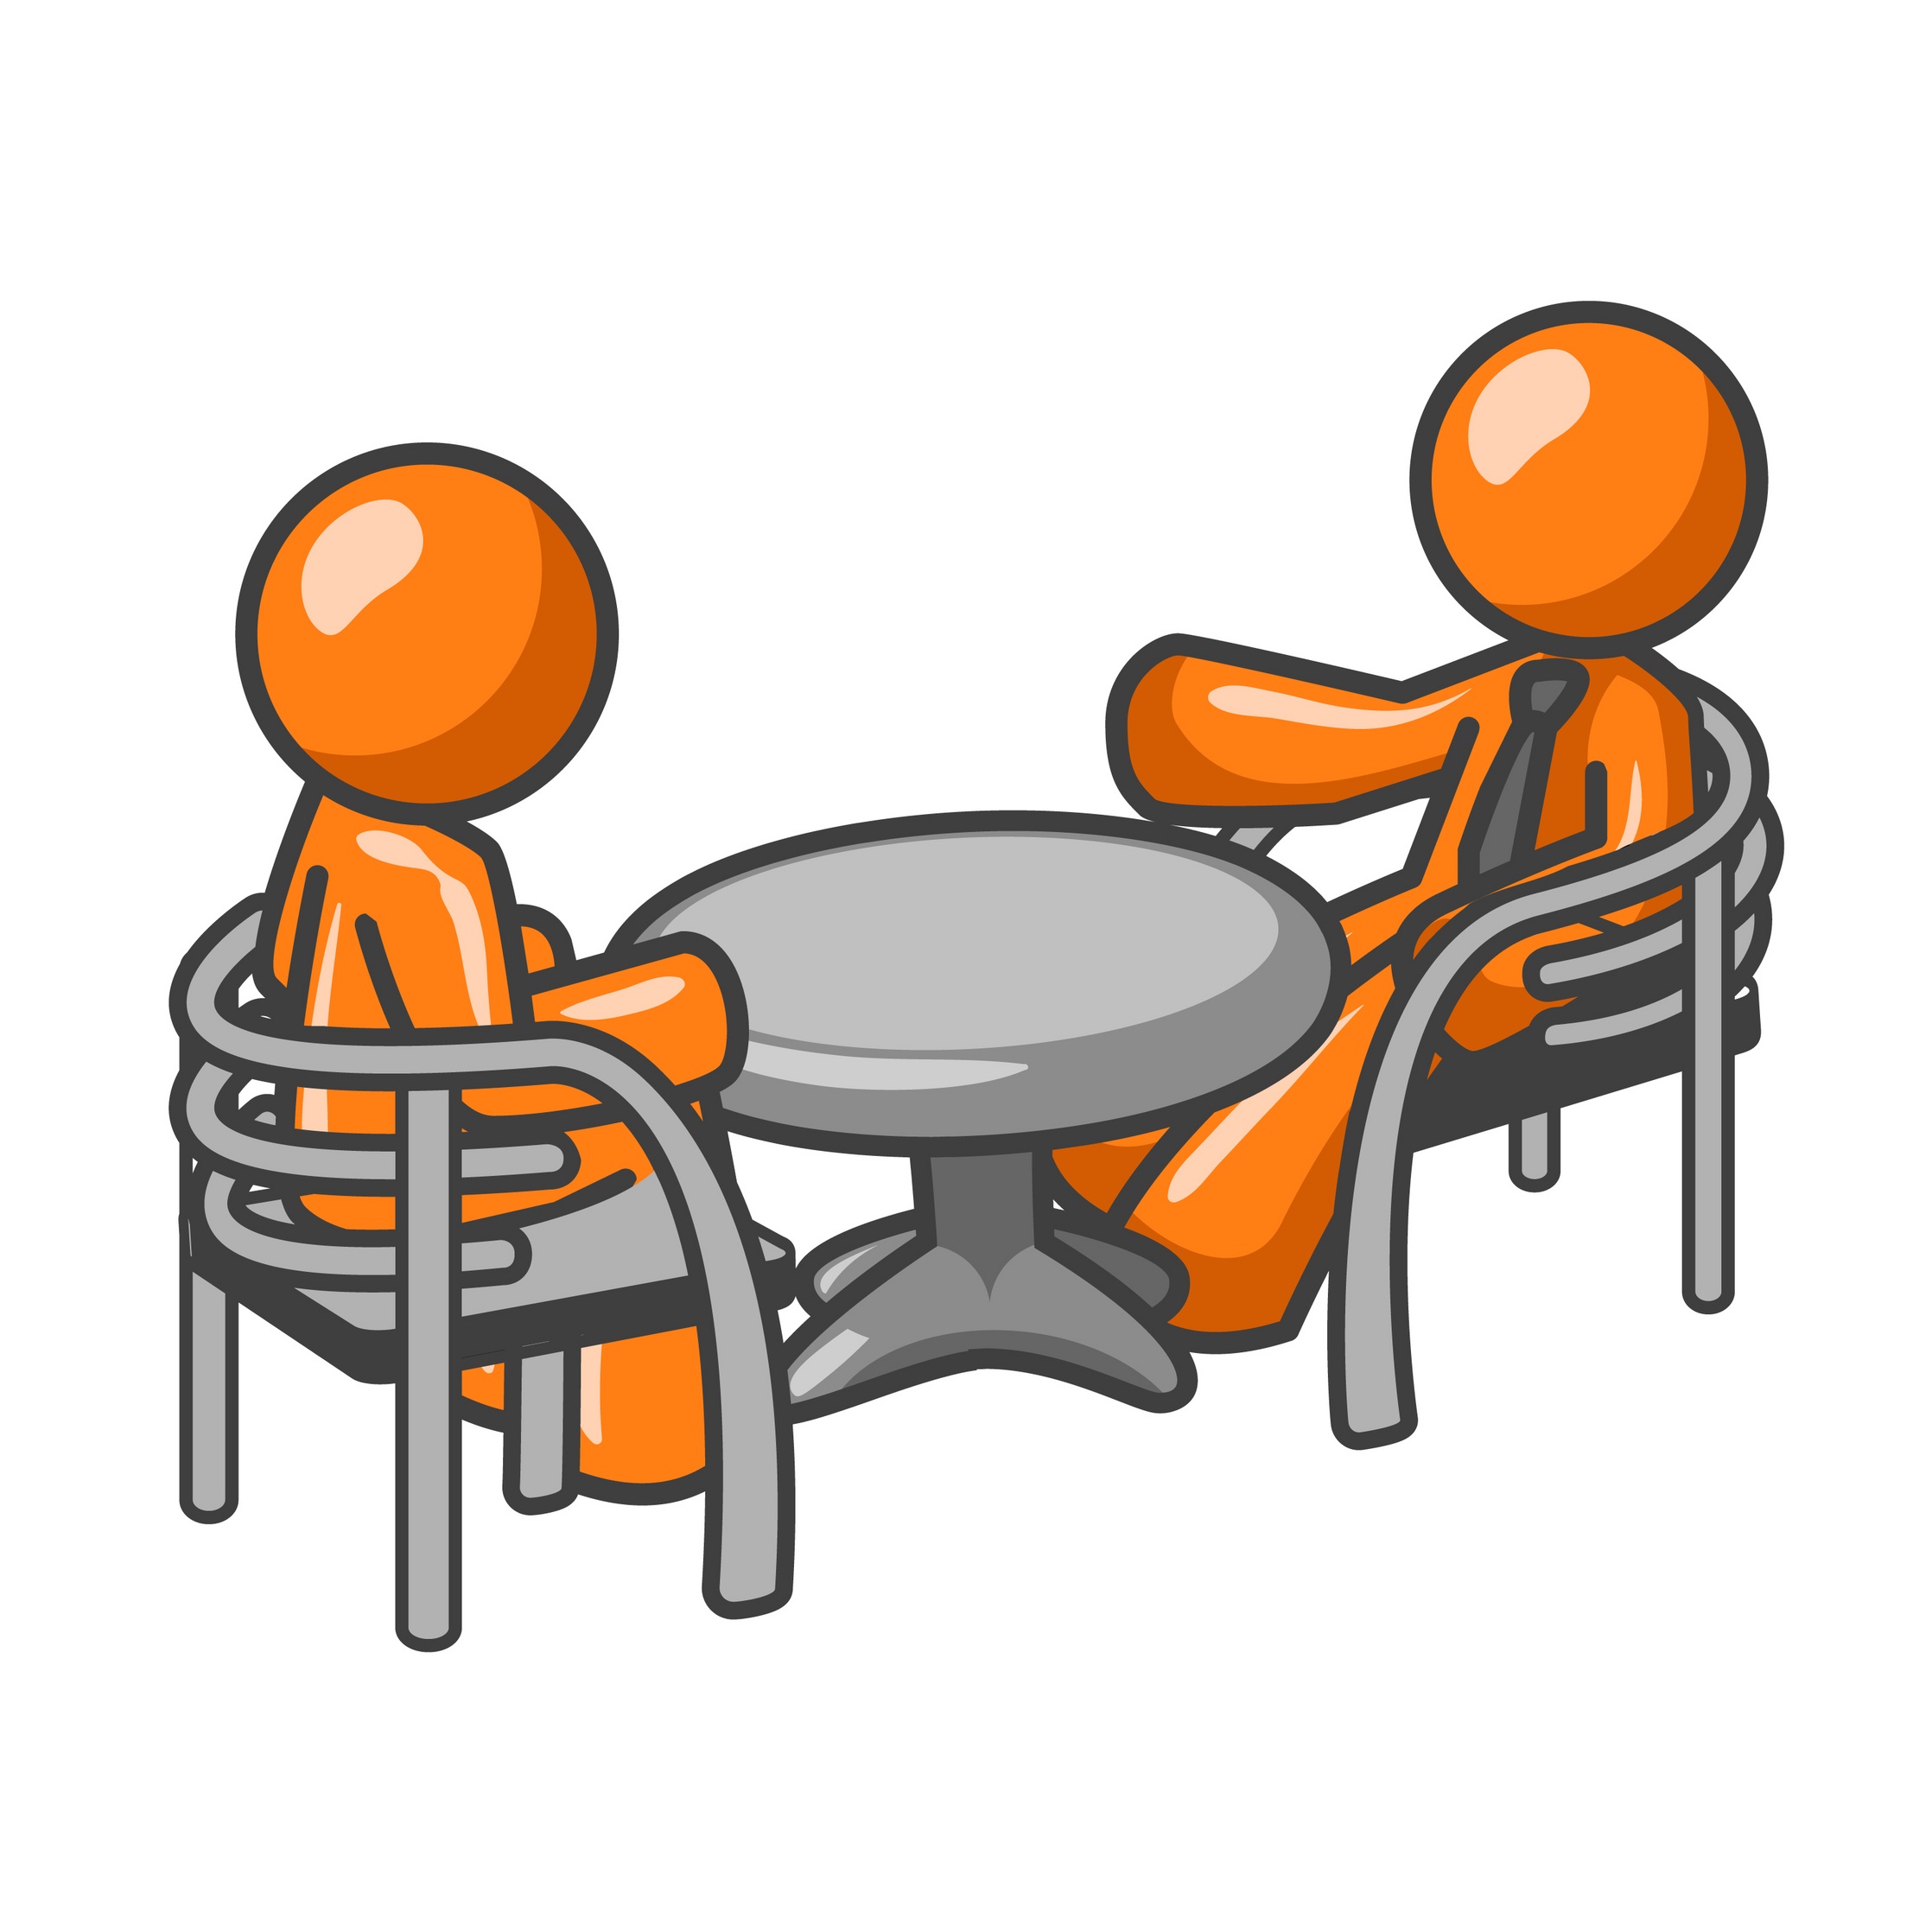 counseling clipart personal interview